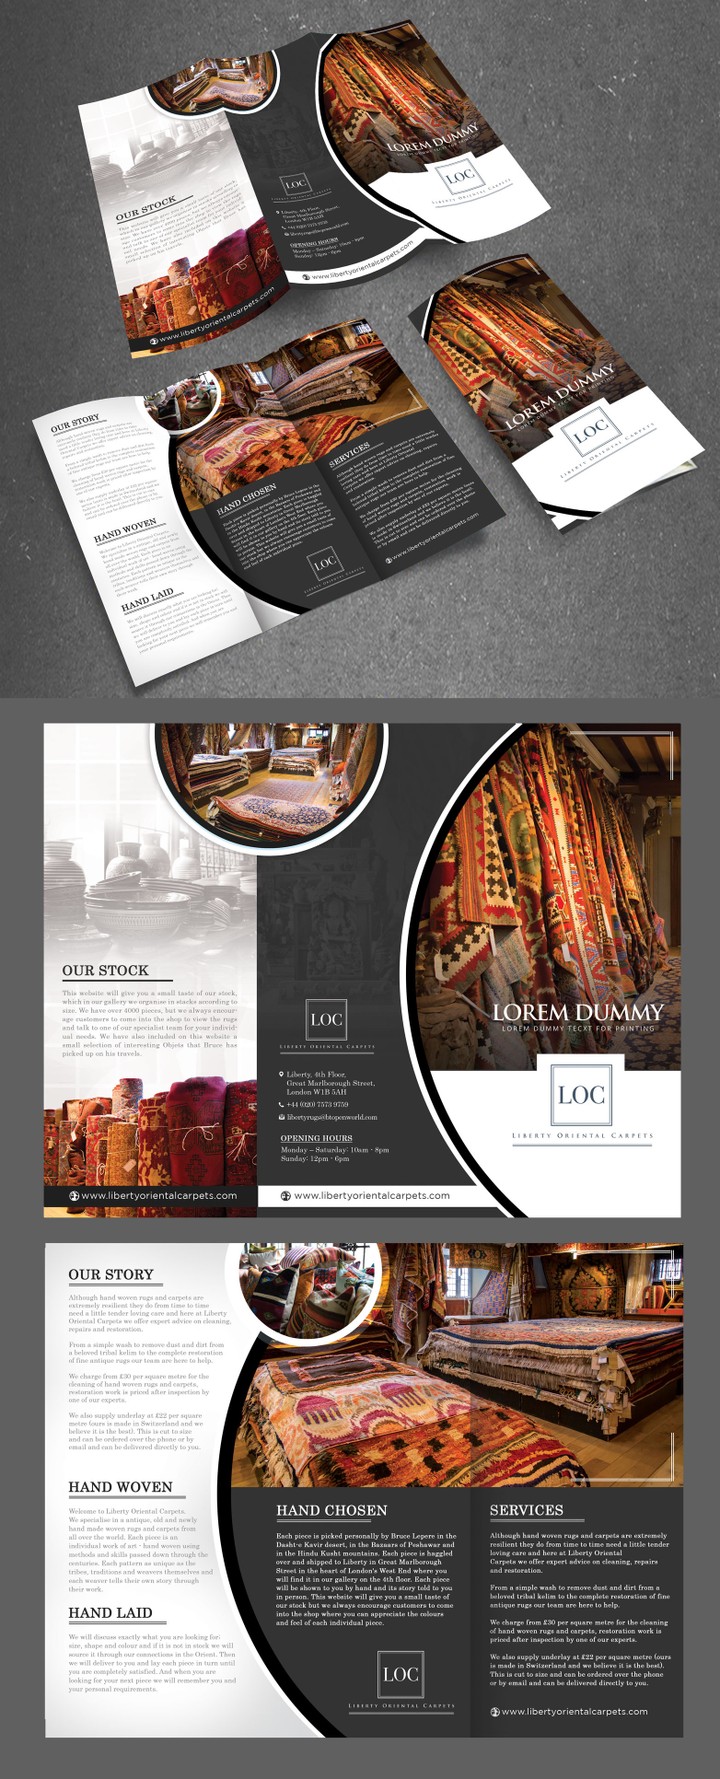 Brochure required for major London based Oriental Rug company